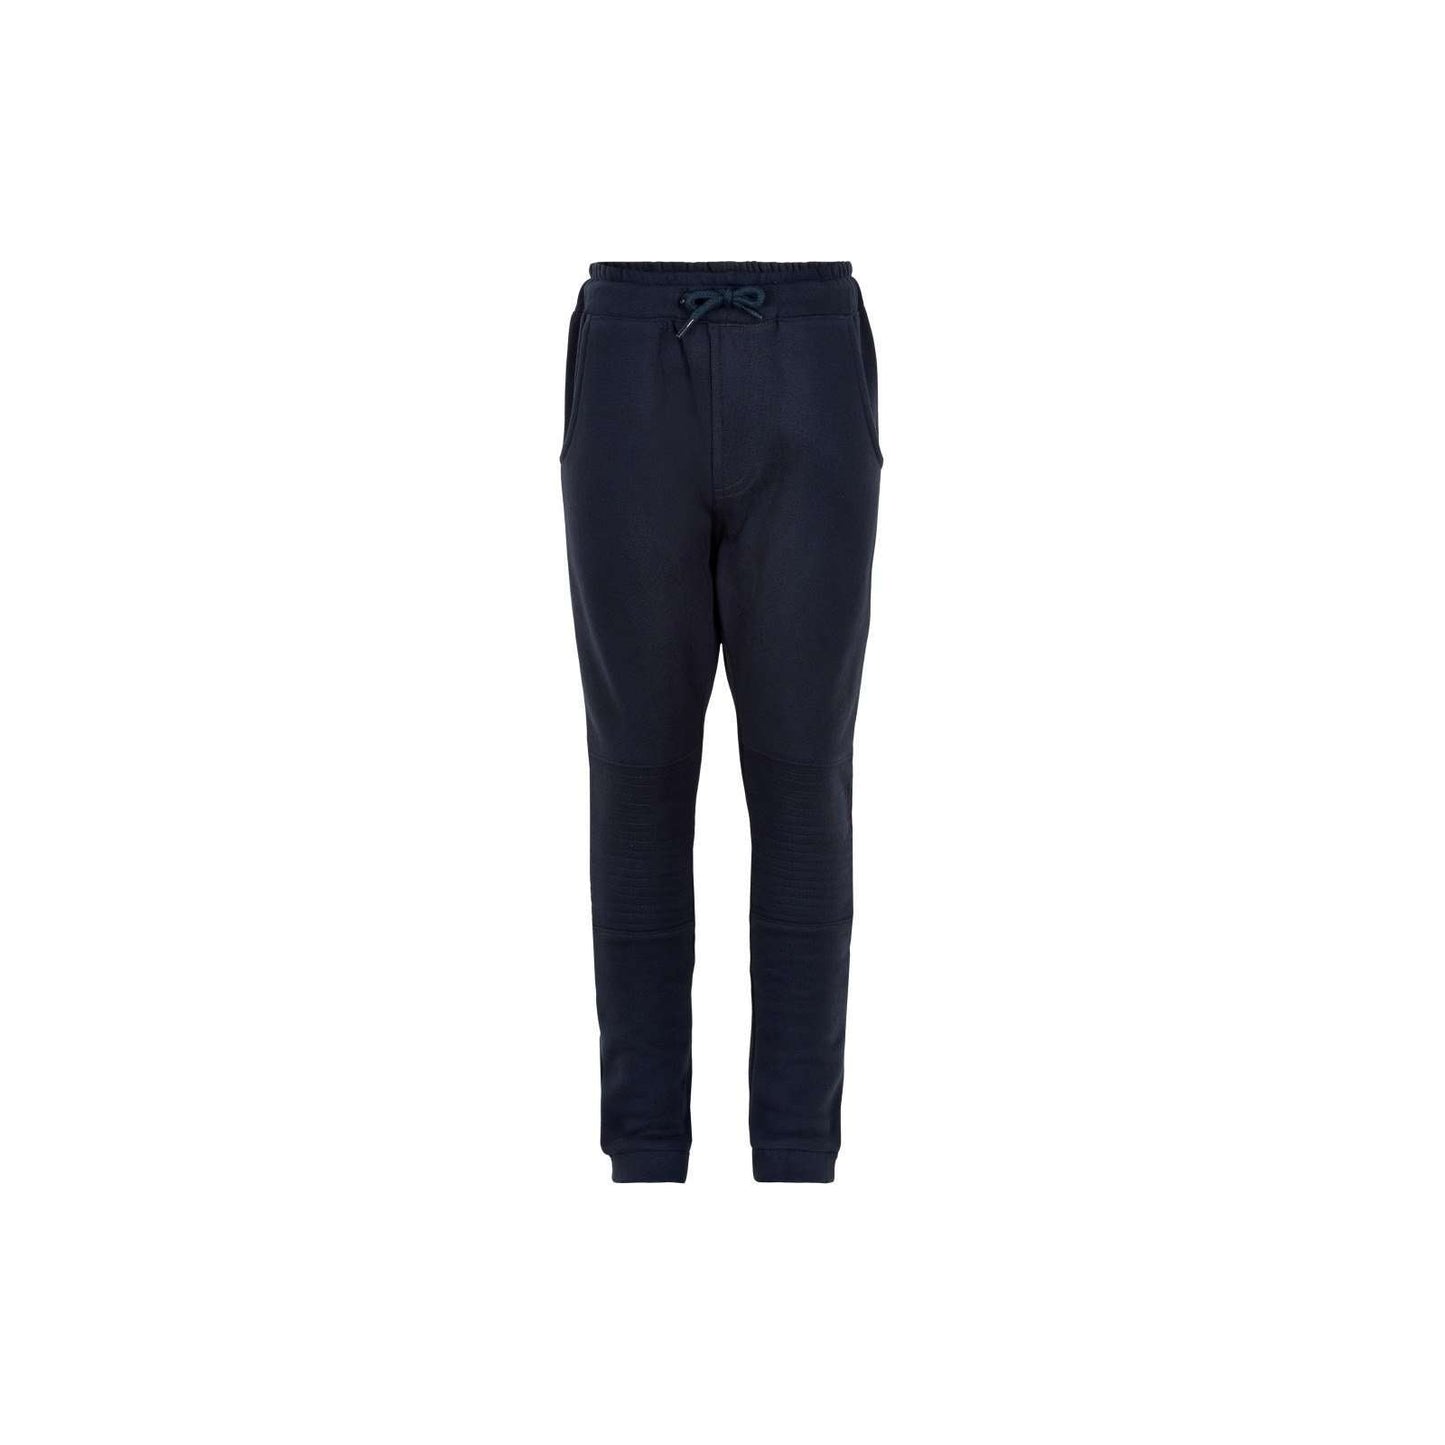 The New Bottoms 3T/4T / navy Eco Organic Sweatpants